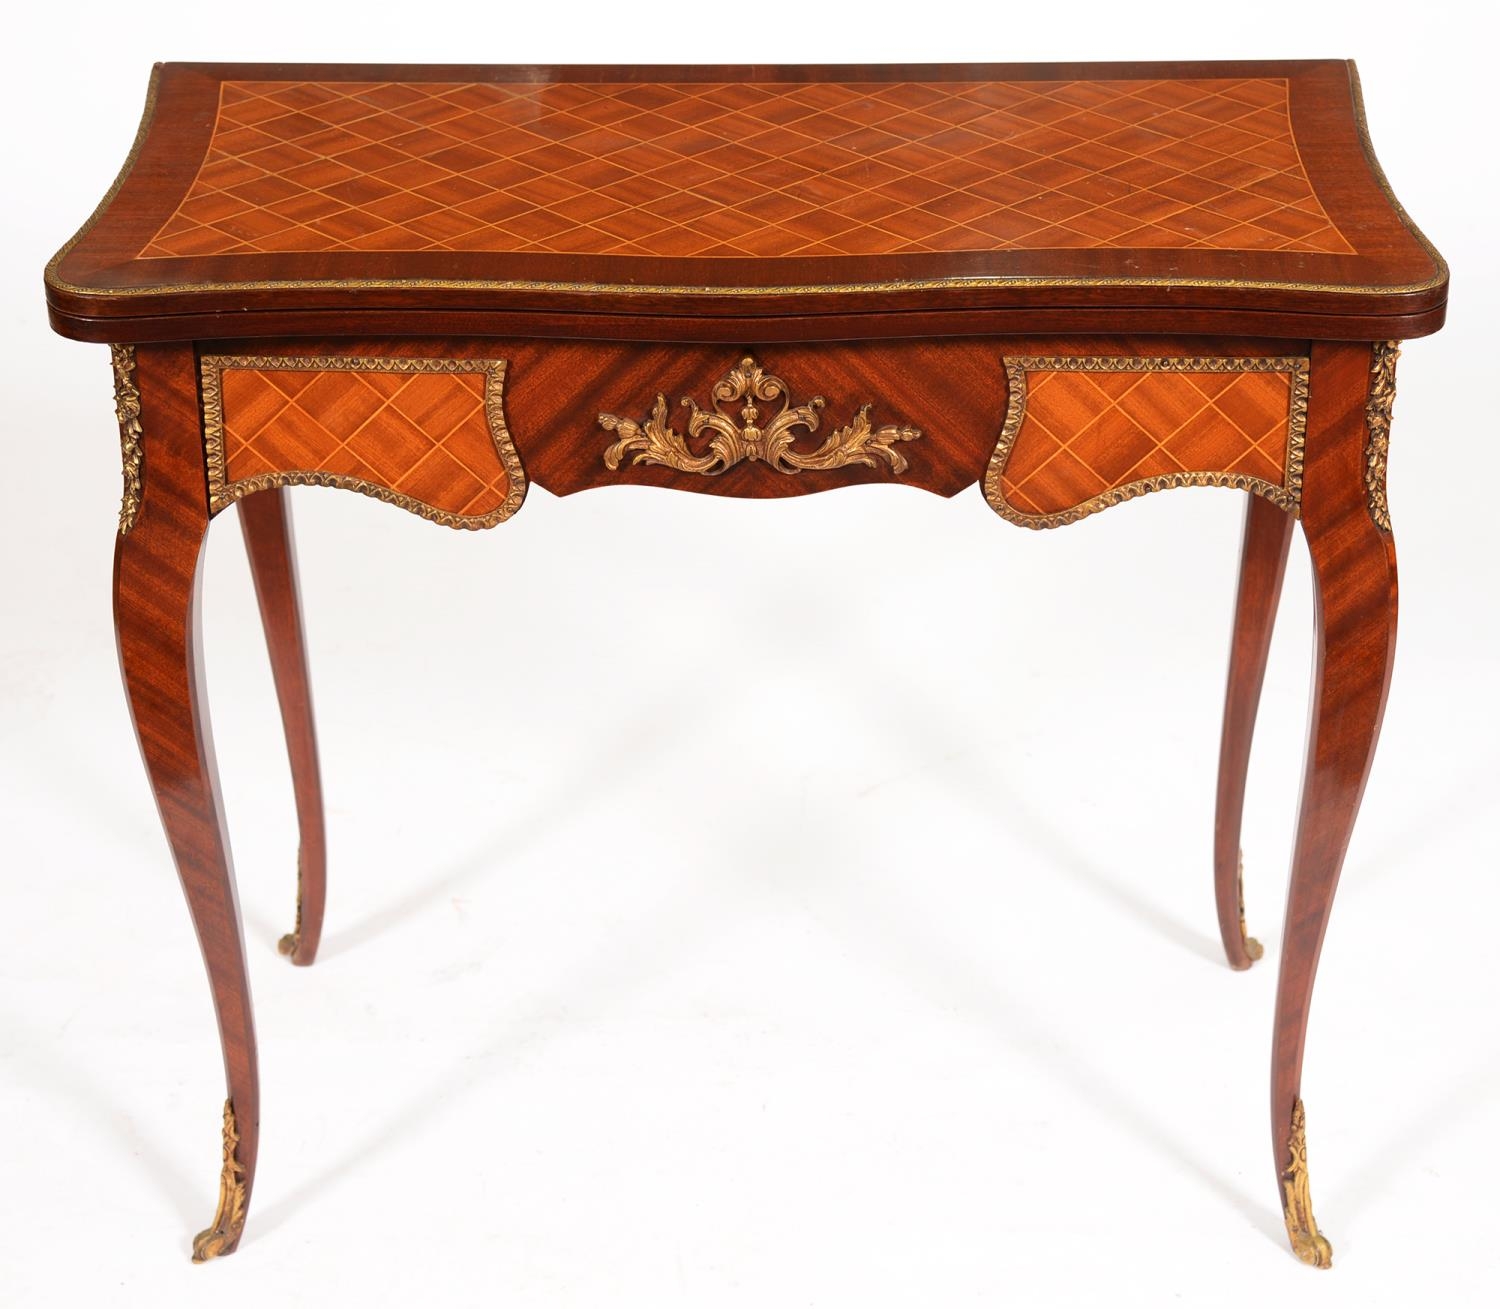 A reproduction serpentine mahogany and trellis inlaid card table, in Louis XV style, with brass